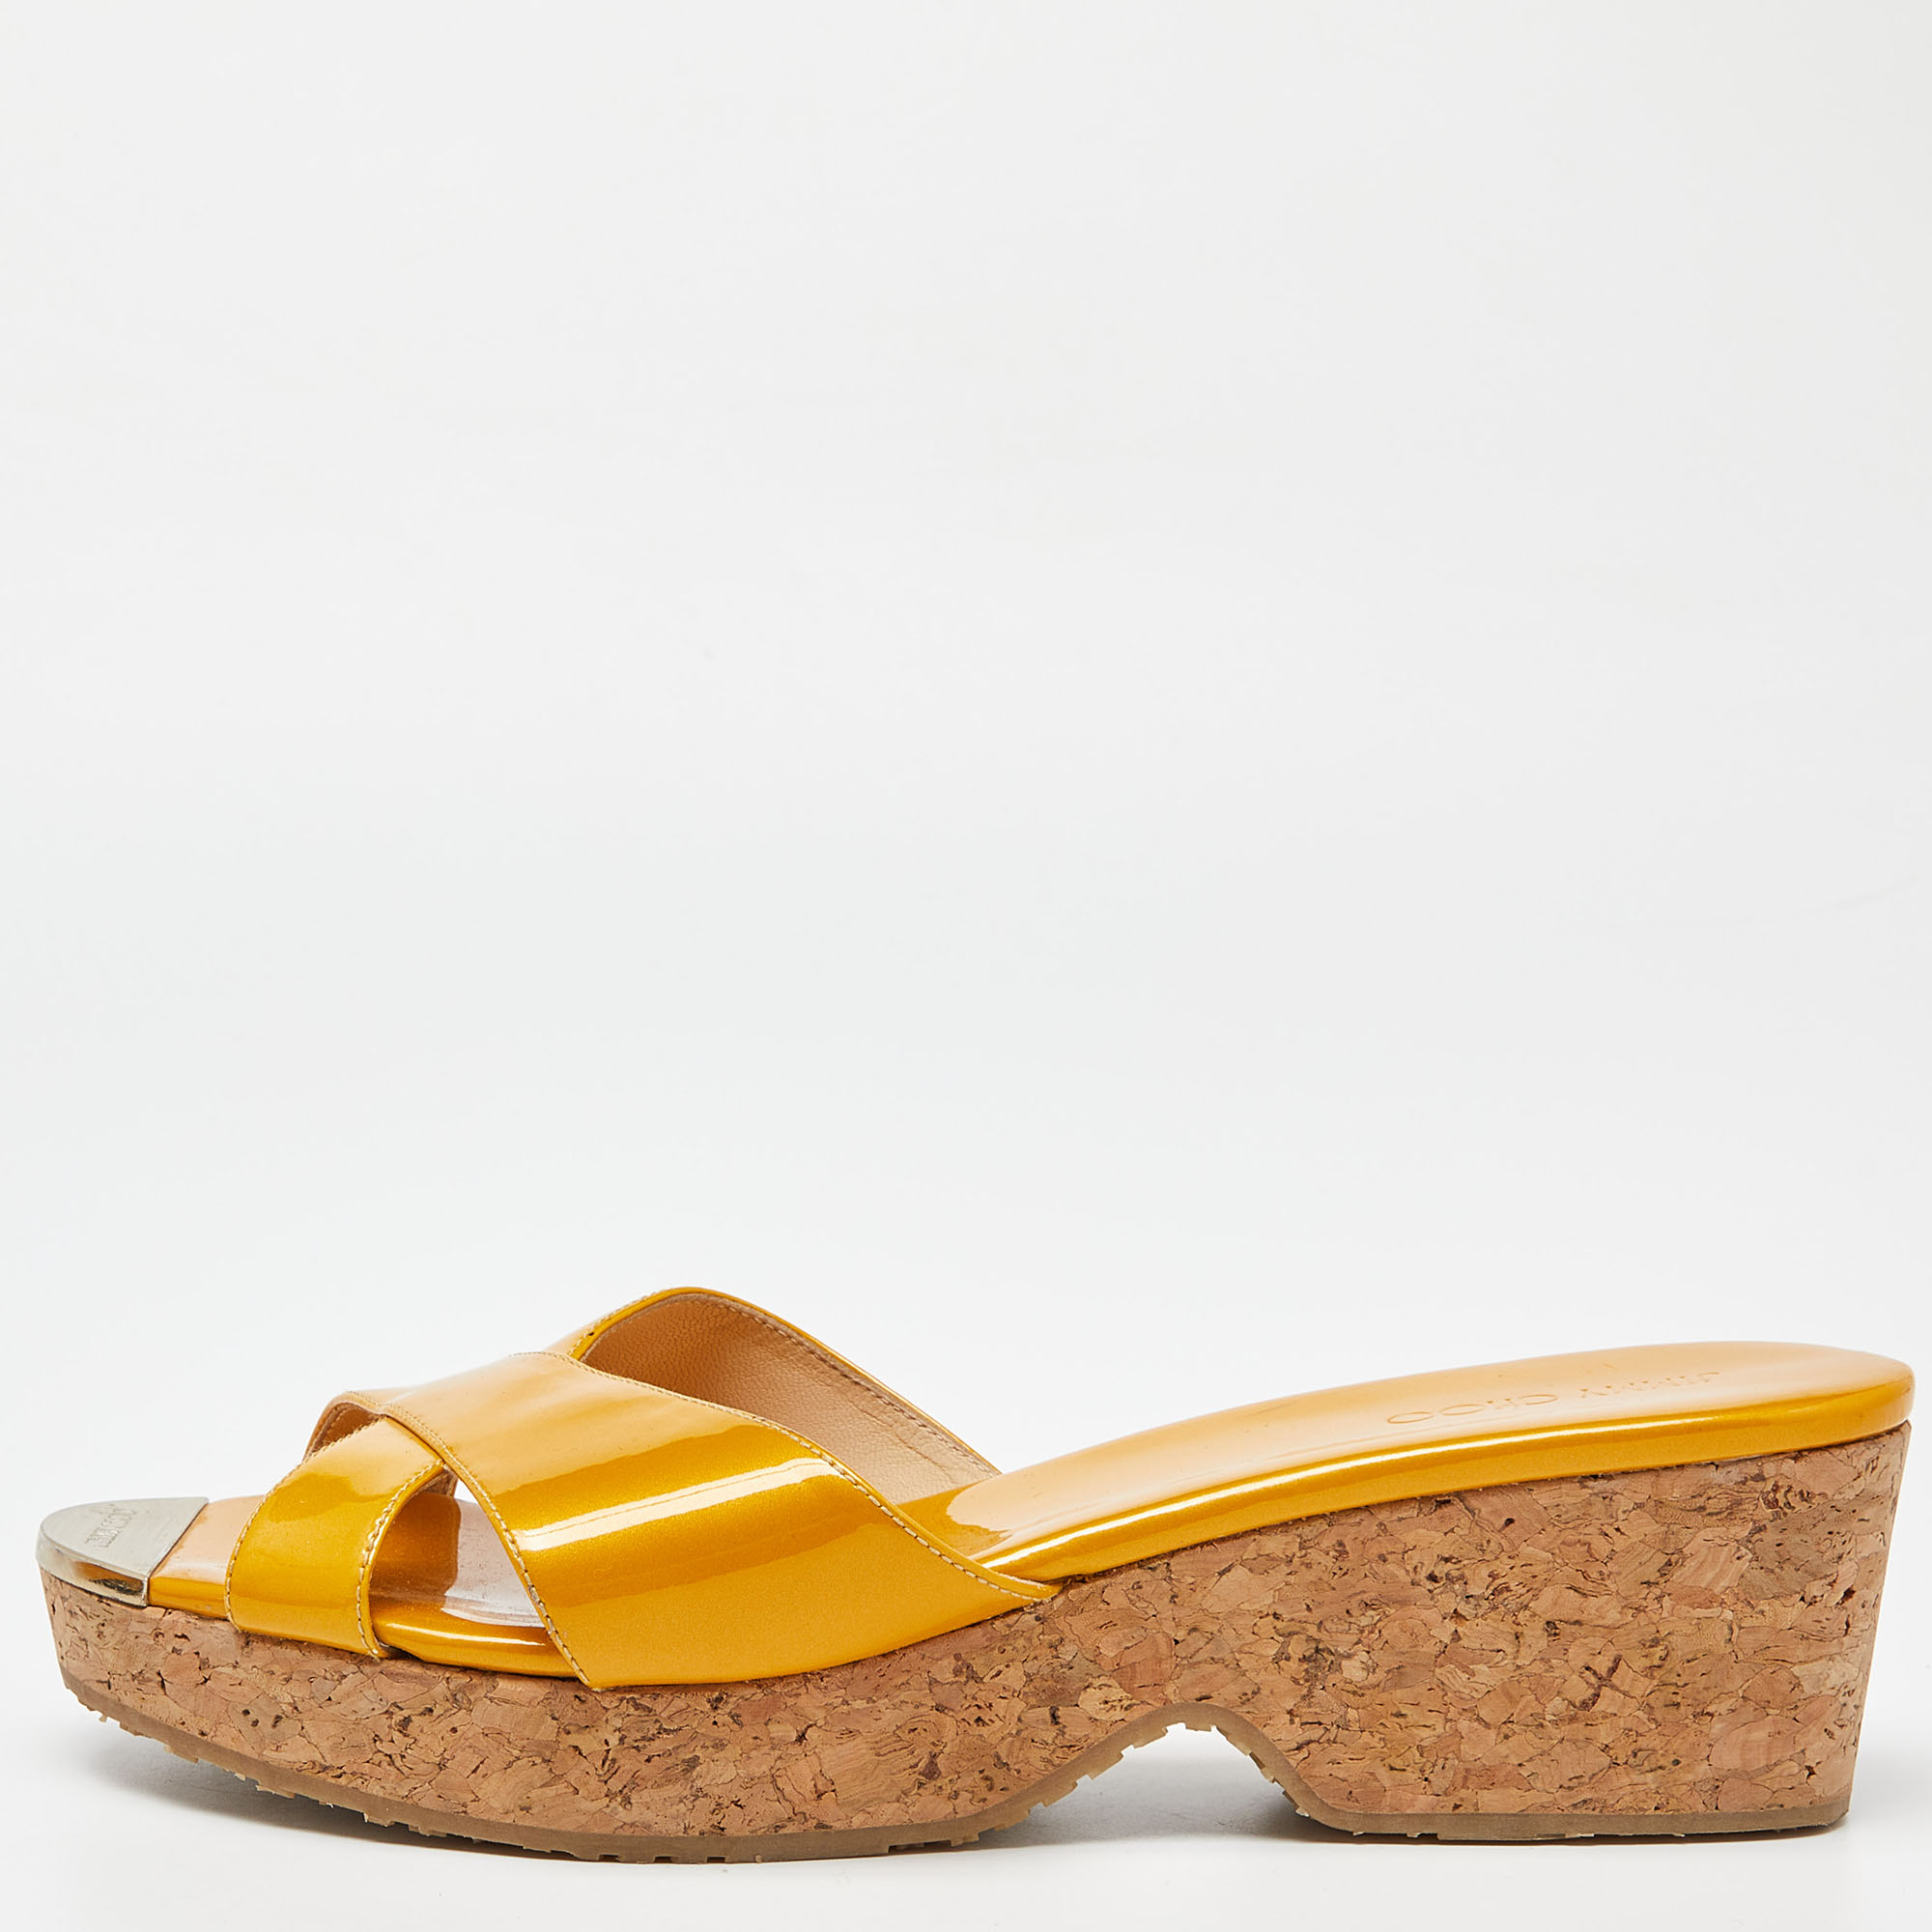 Pre-owned Jimmy Choo Mustard Yellow Patent Leather Pandora Cork Wedges Size 39.5